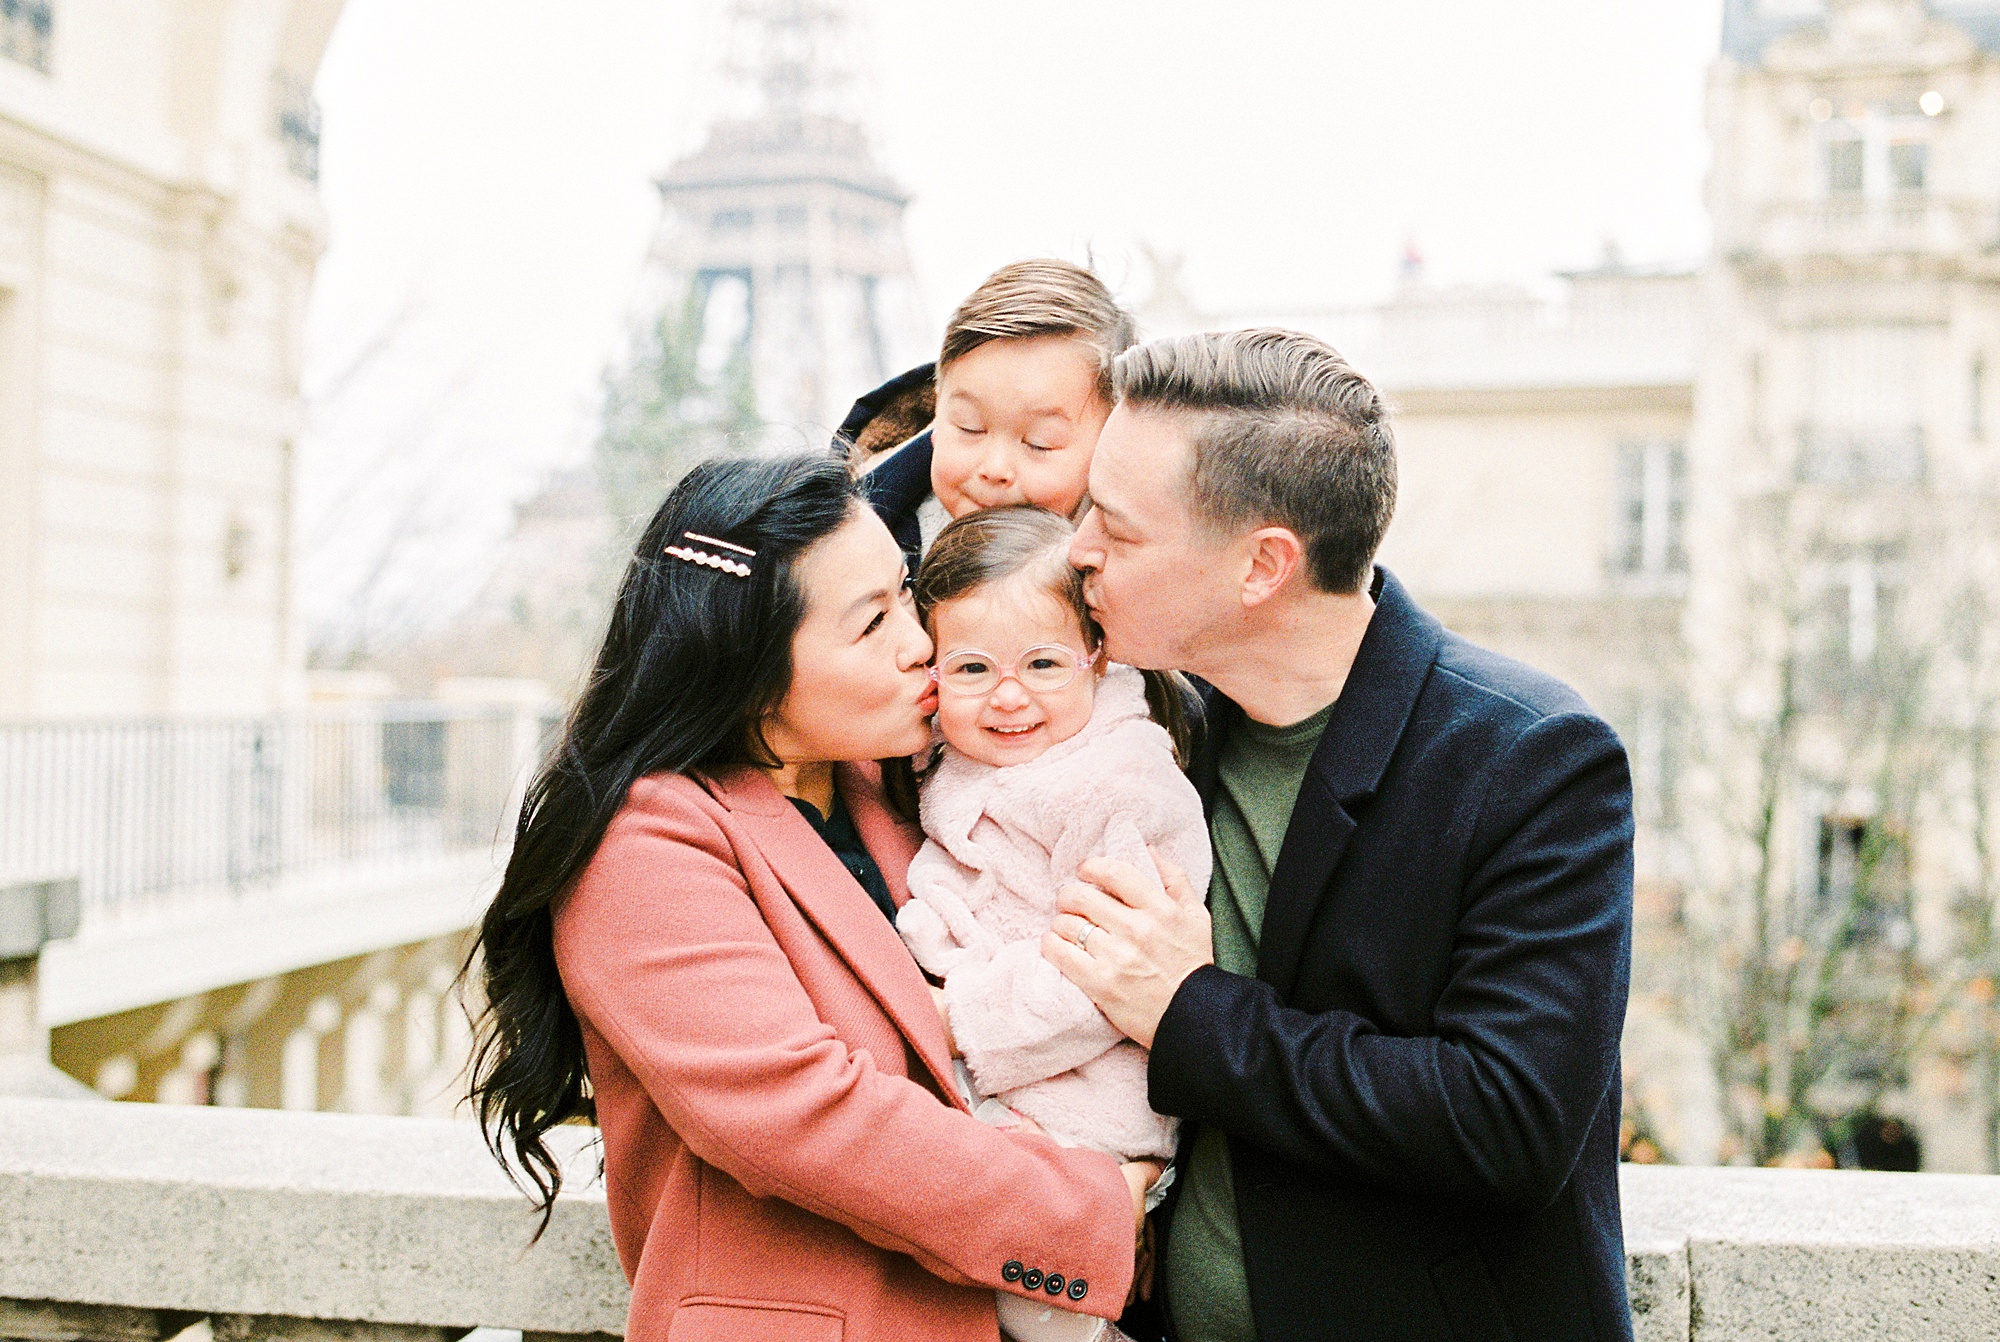 A family portrait session at the Eiffel Tower